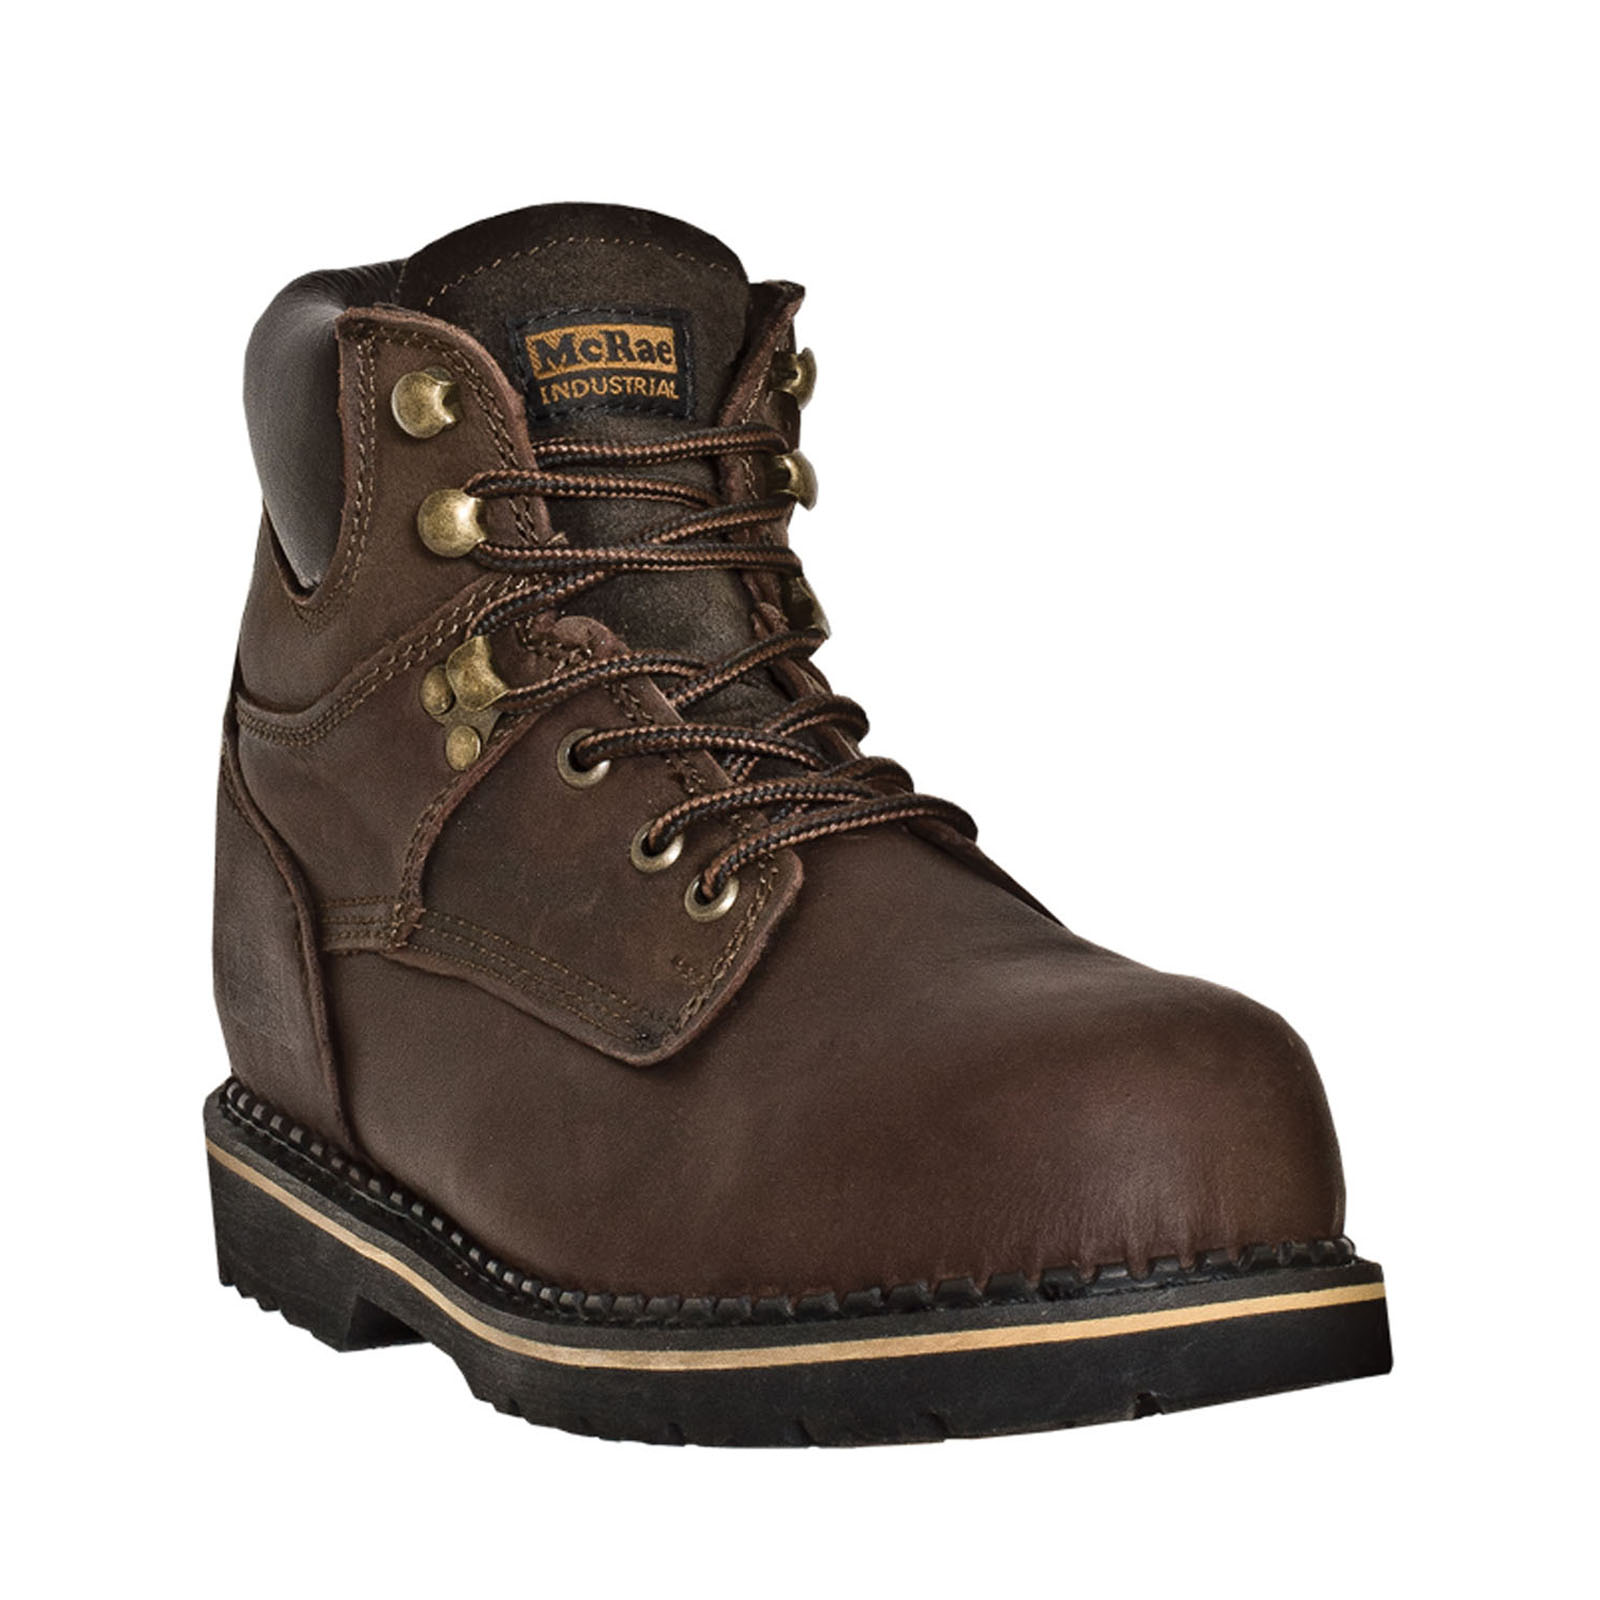 McRae Industrial Men's 6" Leather Steel Toe Work Boot Wide Width Available - Brown